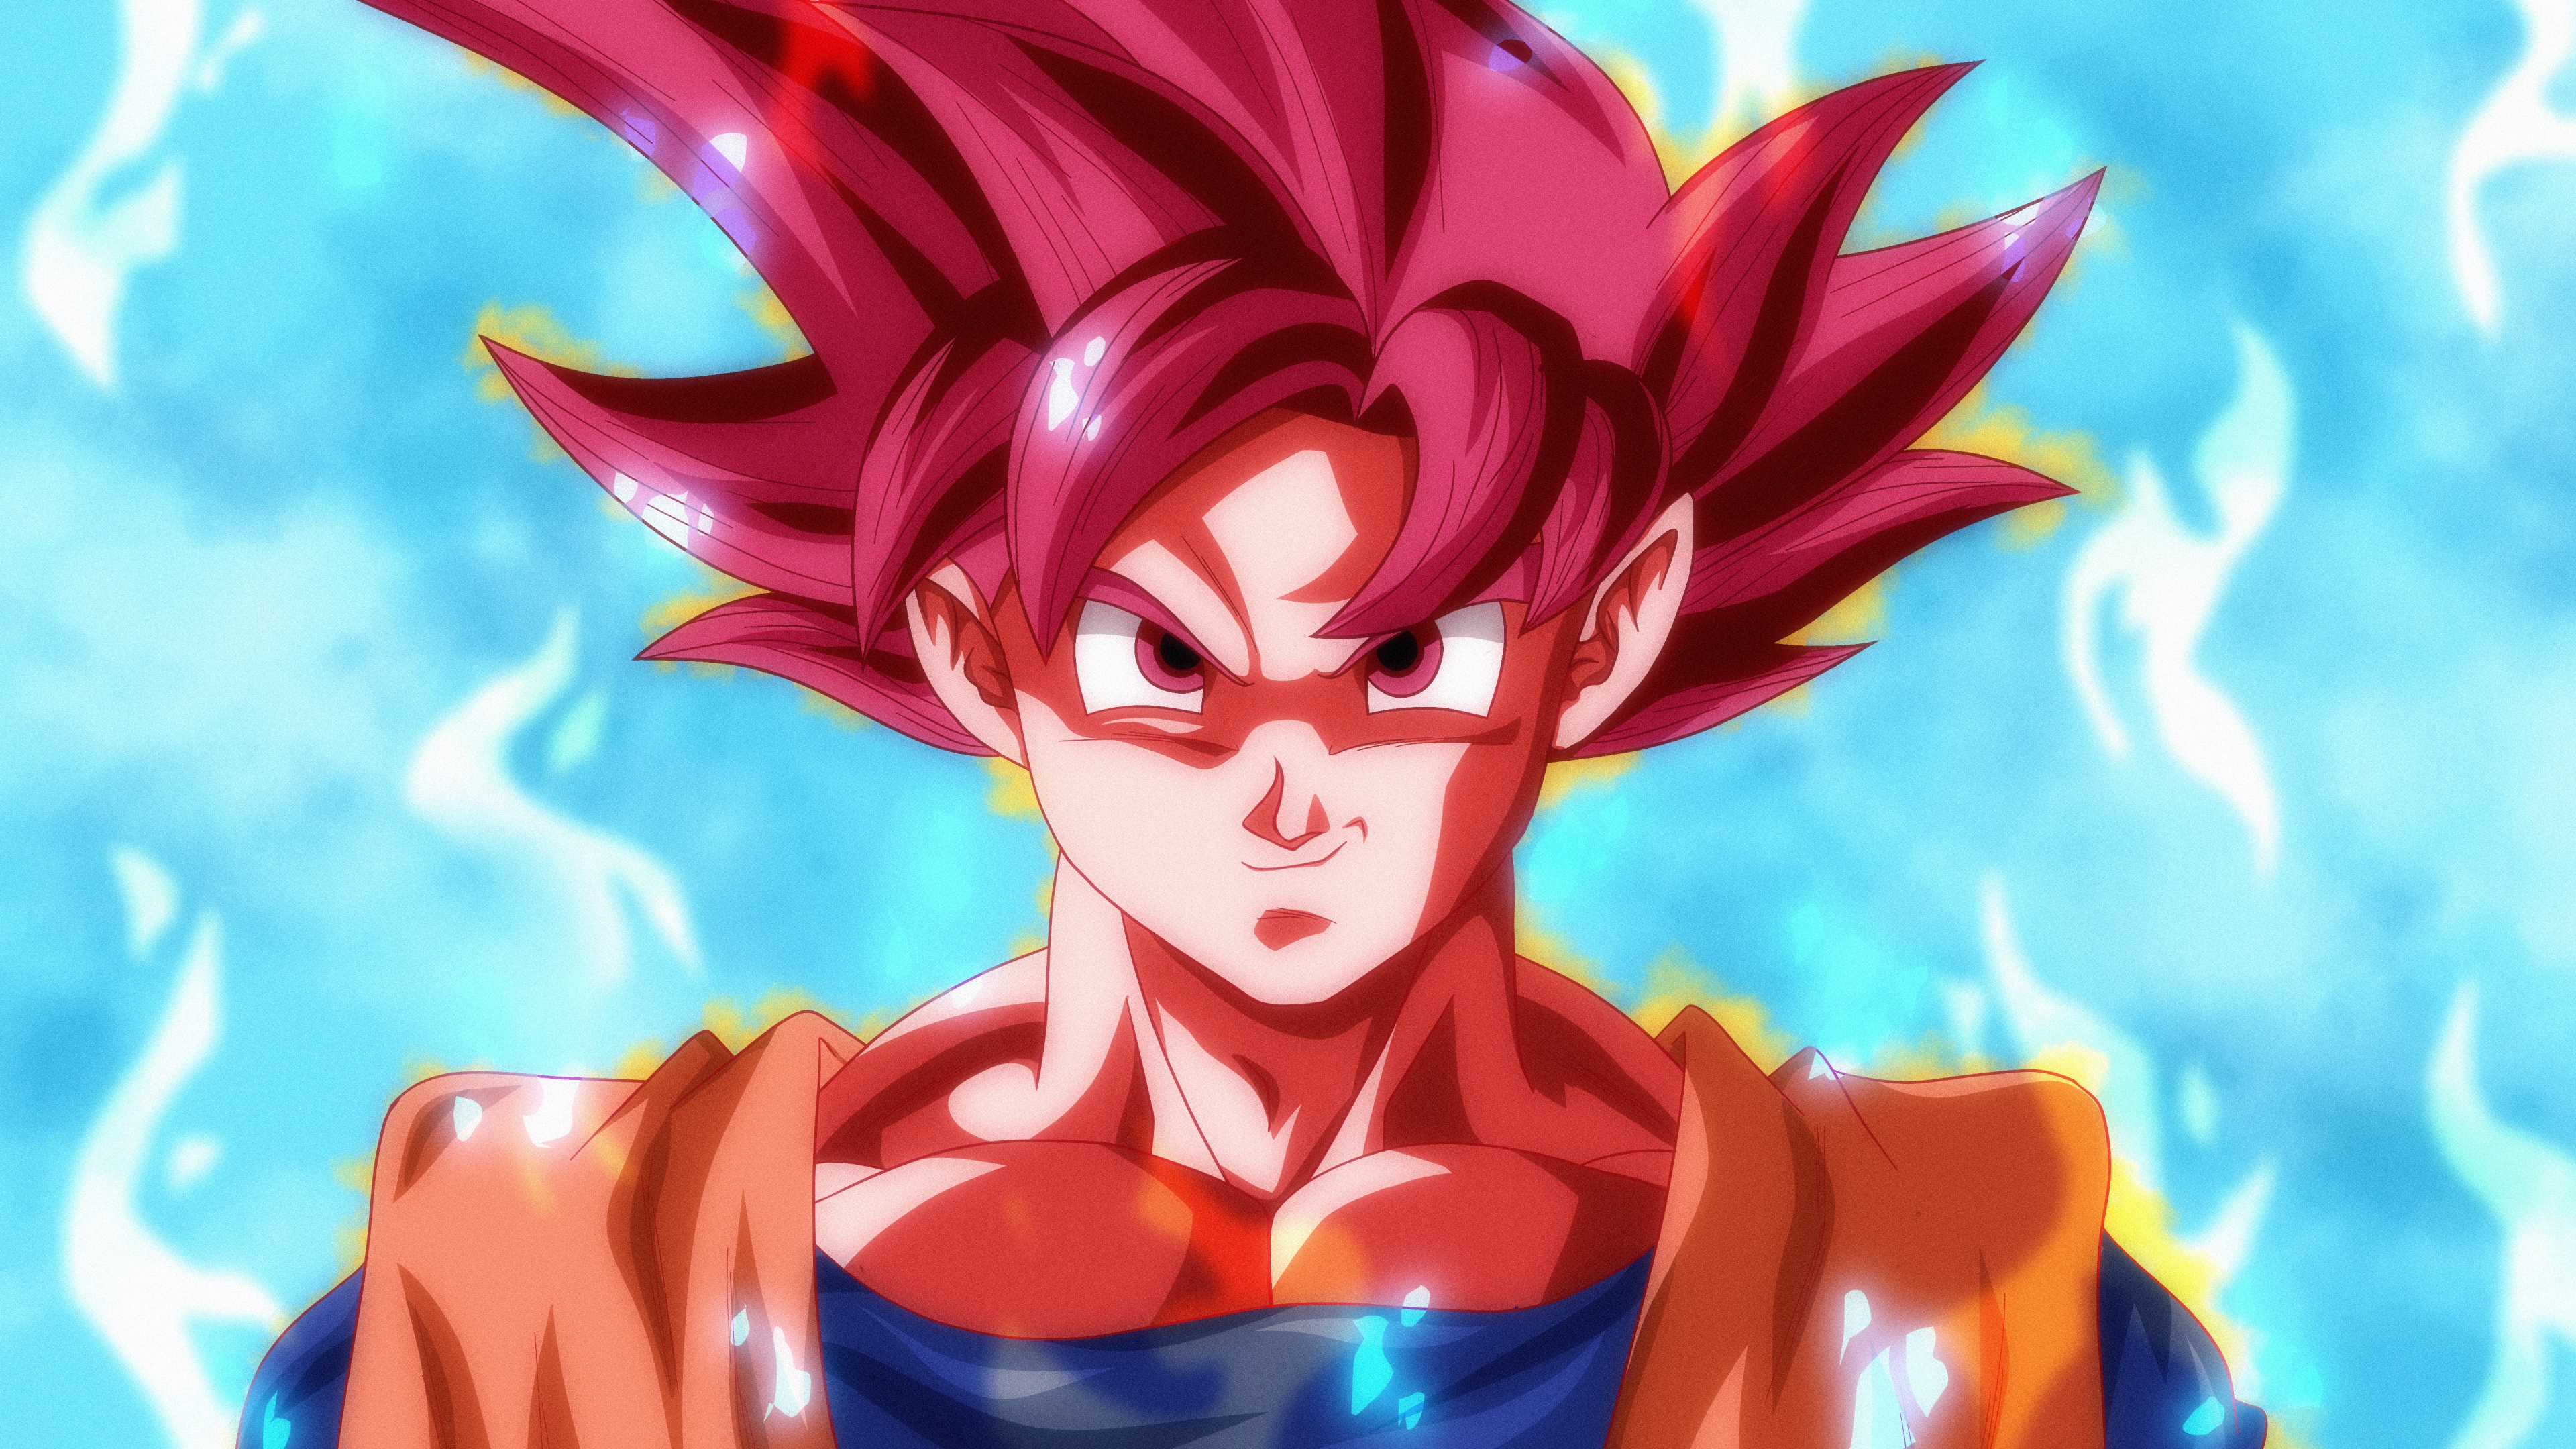 180 Super Saiyan Blue HD Wallpapers and Backgrounds